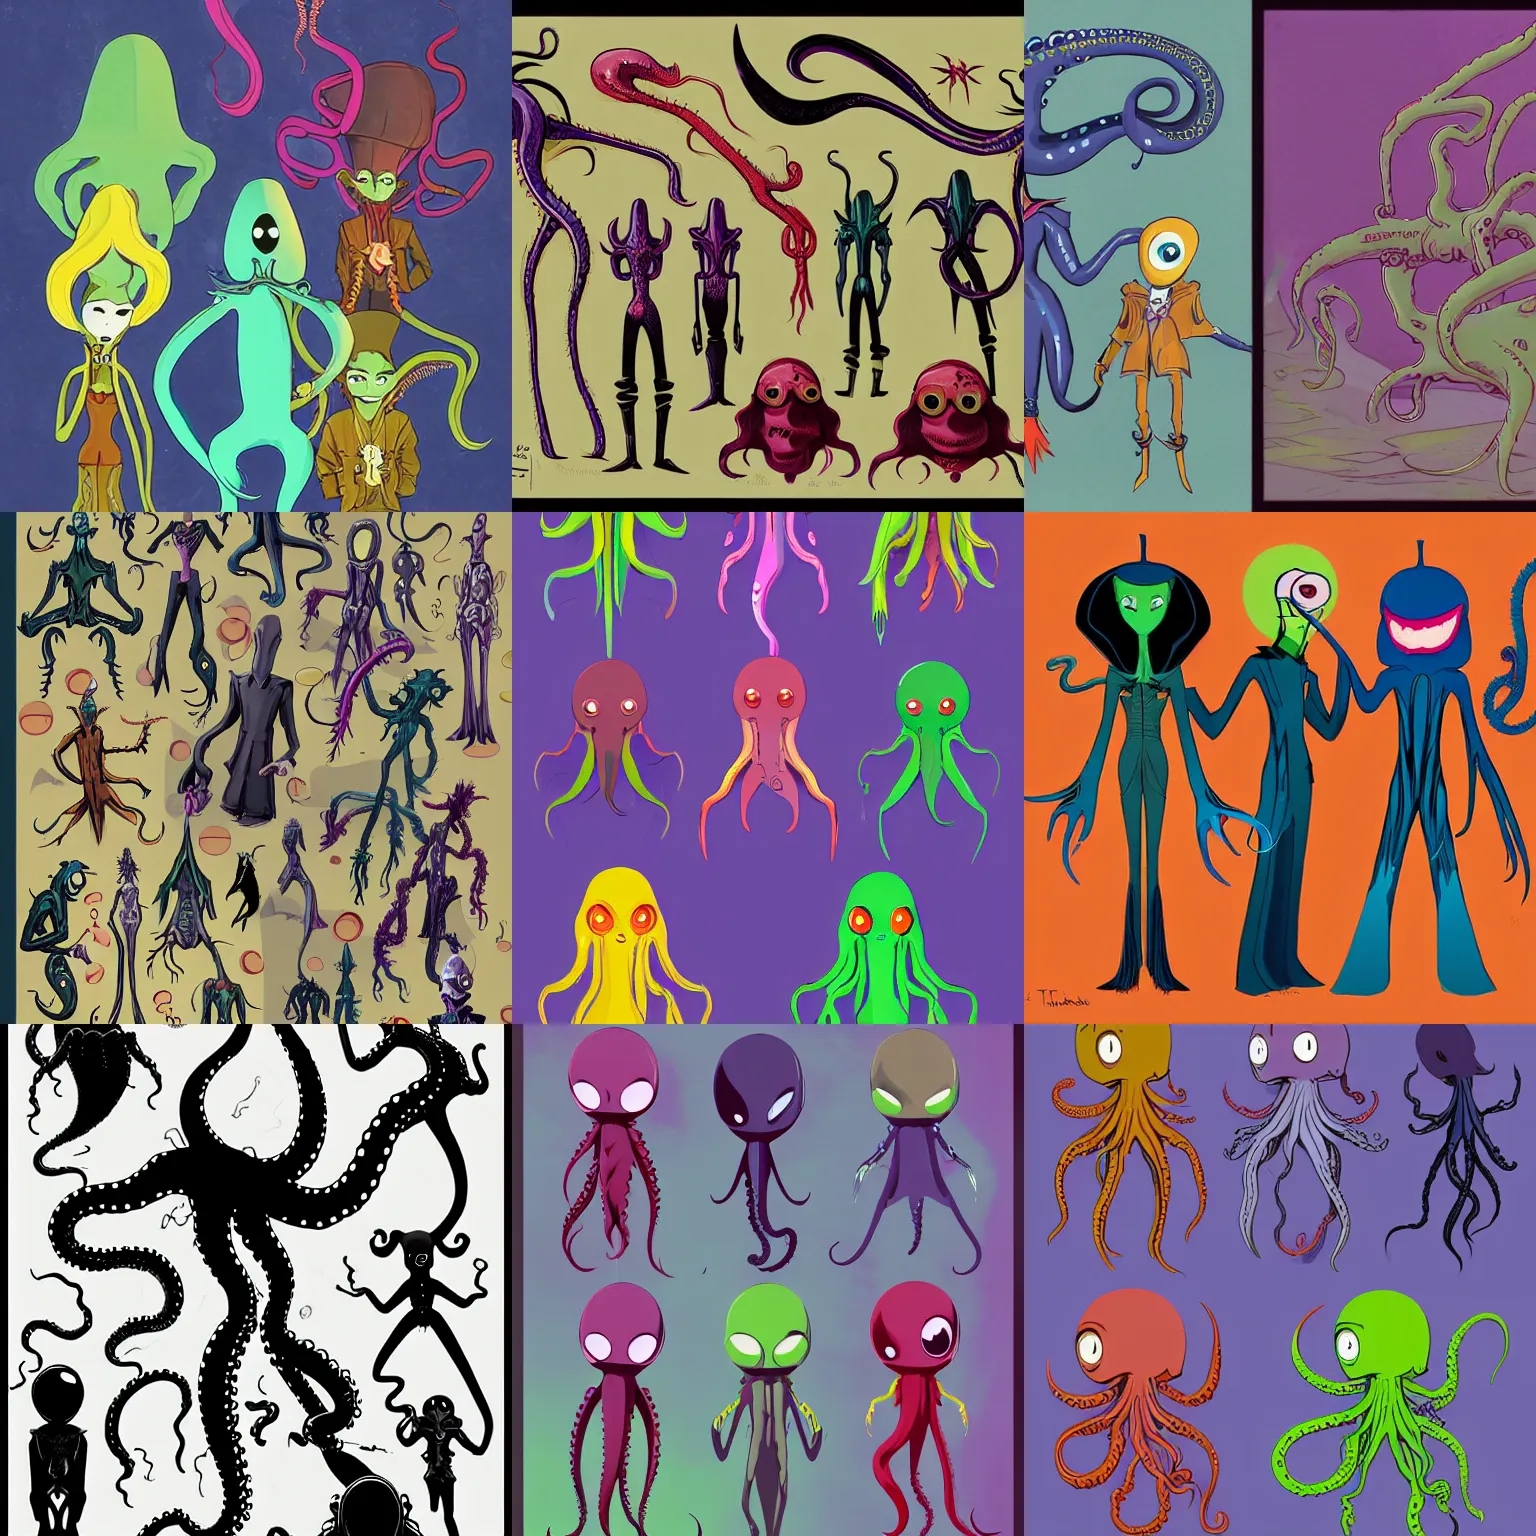 Prompt: vintage colorful tall lean vampire ninja aliens with big black alien eyes and a squid beak with three webbed tentacle arms and skinny thin human legs inspired by Ursala from Disneys the little mermaid as playable characters design sheets for the newest psychonauts video game made by double fine done by tim shafer that focuses on an ocean setting with help from the artists of odd world inhabitants inc and Lauren faust from her work on dc superhero girls and lead artist Andy Suriano from rise of the teenage mutant ninja turtles on nickelodeon using artistic cues for the game fret nice and art direction from the Sony 2018 animated film spiderverse